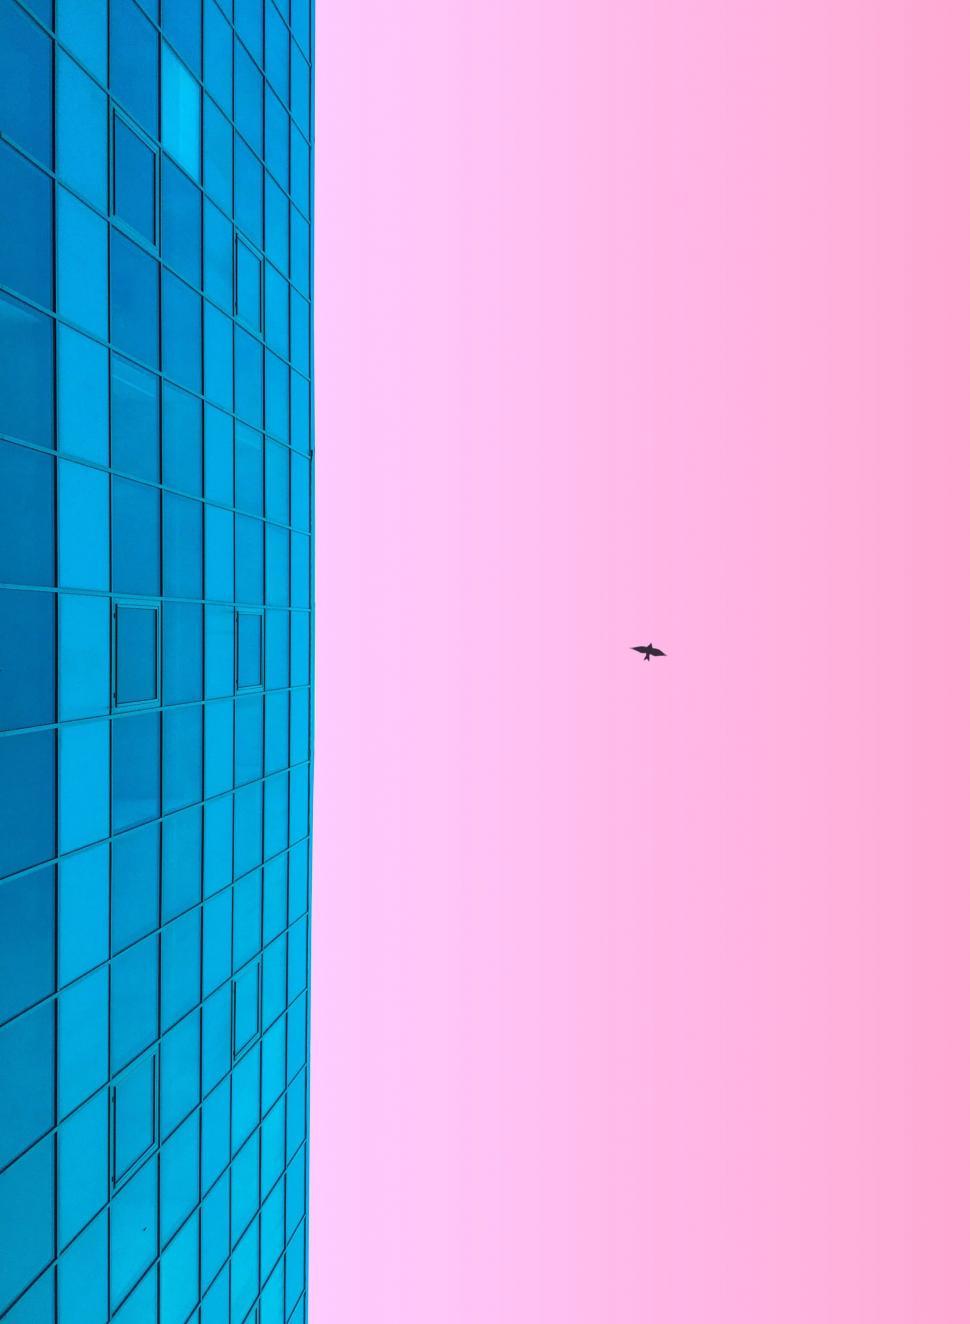 Free Image of Pink and Blue Building With Plane Flying in Sky 